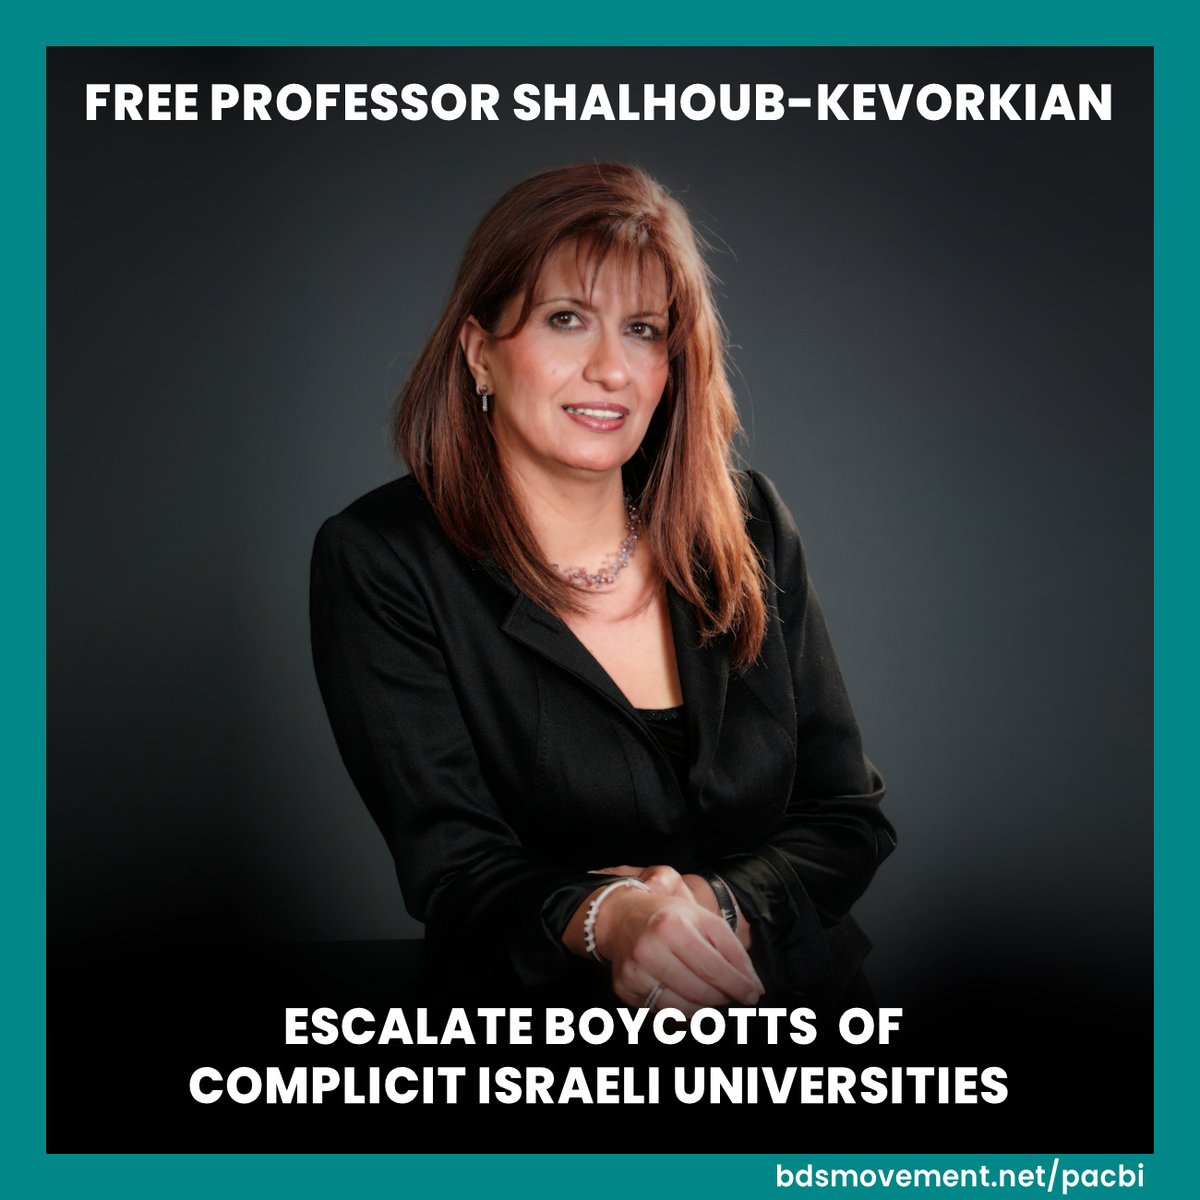 We strongly condemn the shameful arrest of renowned Palestinian feminist scholar Prof. Nadera Shalhoub-Kevorkian by Israeli forces in occupied Jerusalem. loom.ly/Hctt62E